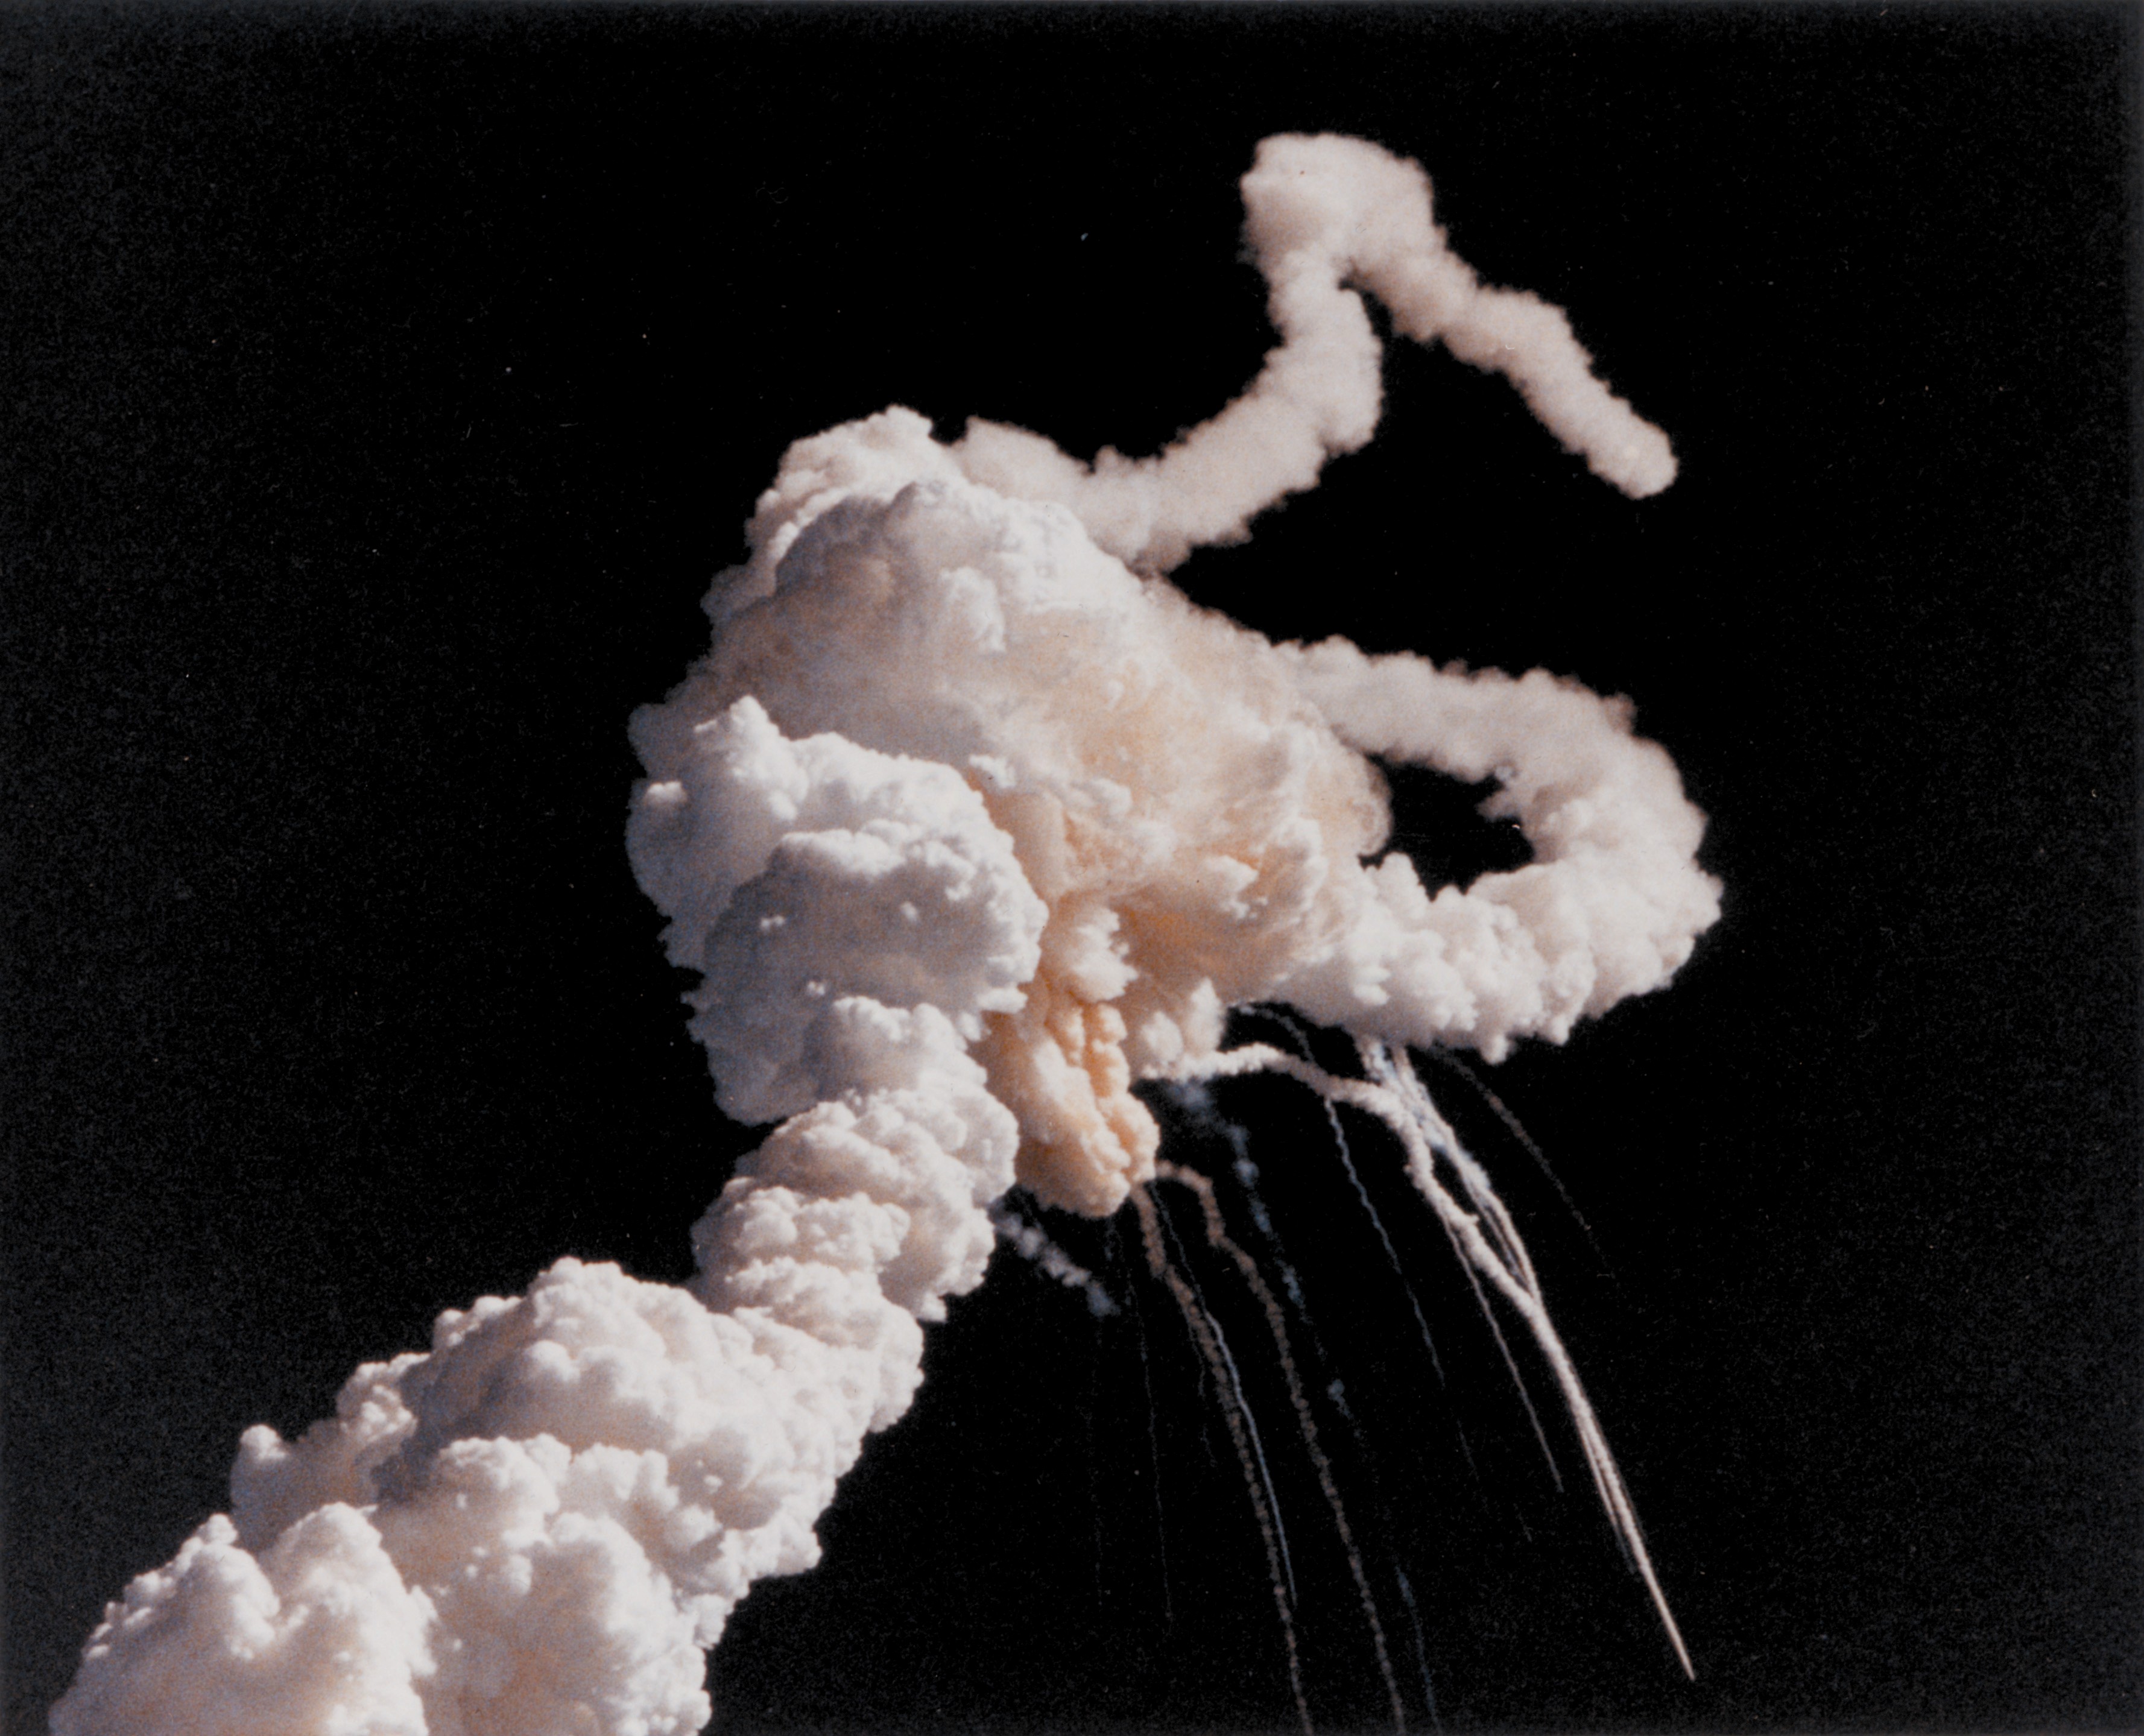 The explosion occurred 1 minute, 13 seconds after liftoff. (NASA)